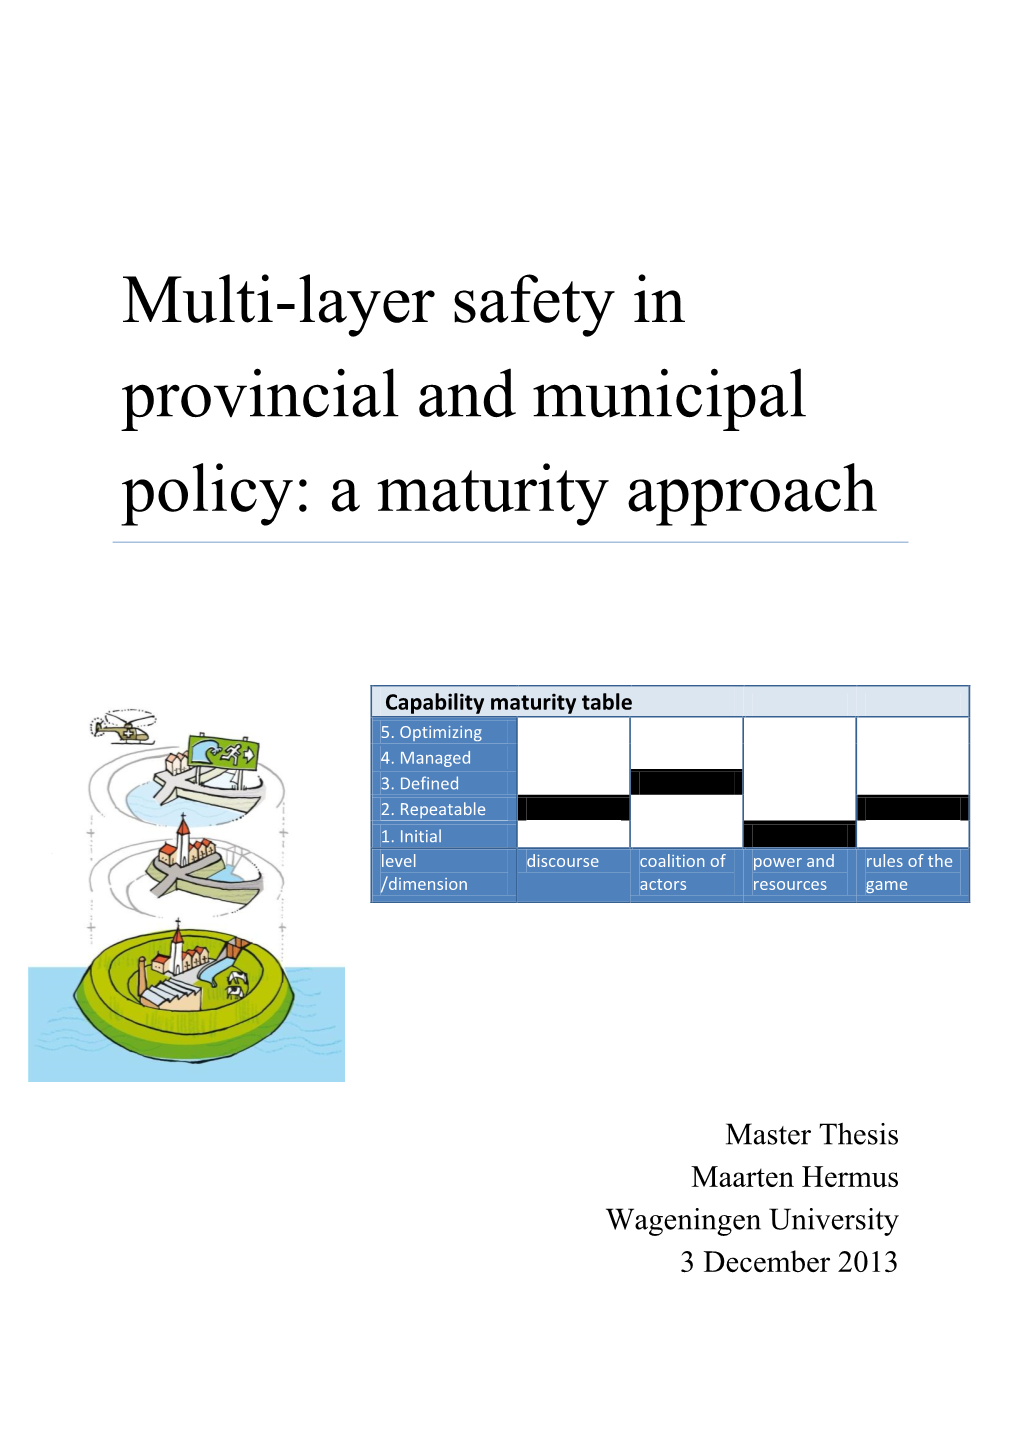 Multi-Layer Safety in Provincial and Municipal Policy: a Maturity Approach